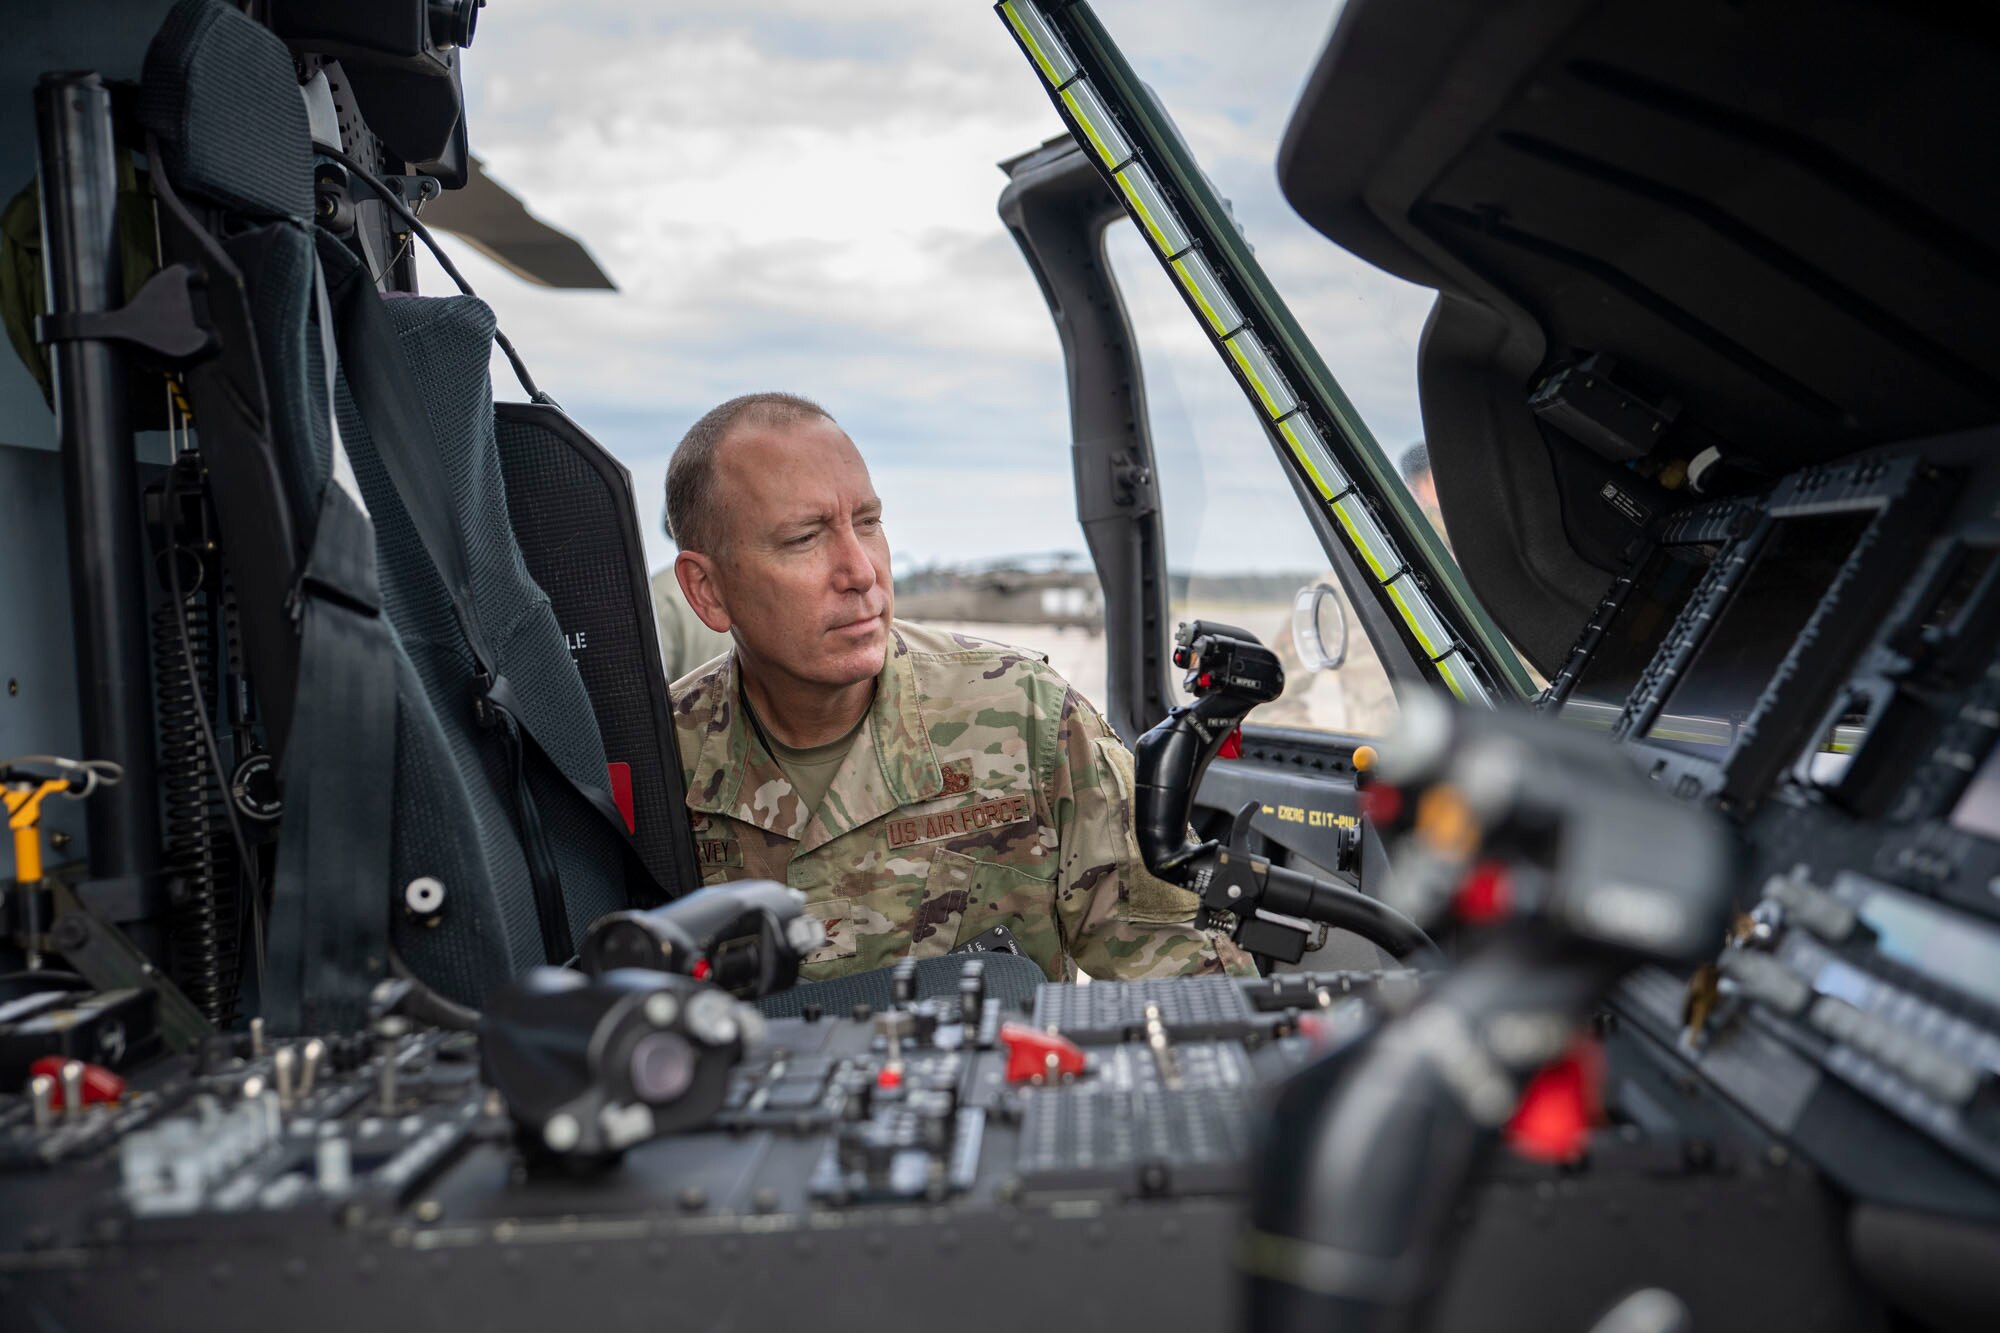 A photo of an Airman looking inside a helicopter